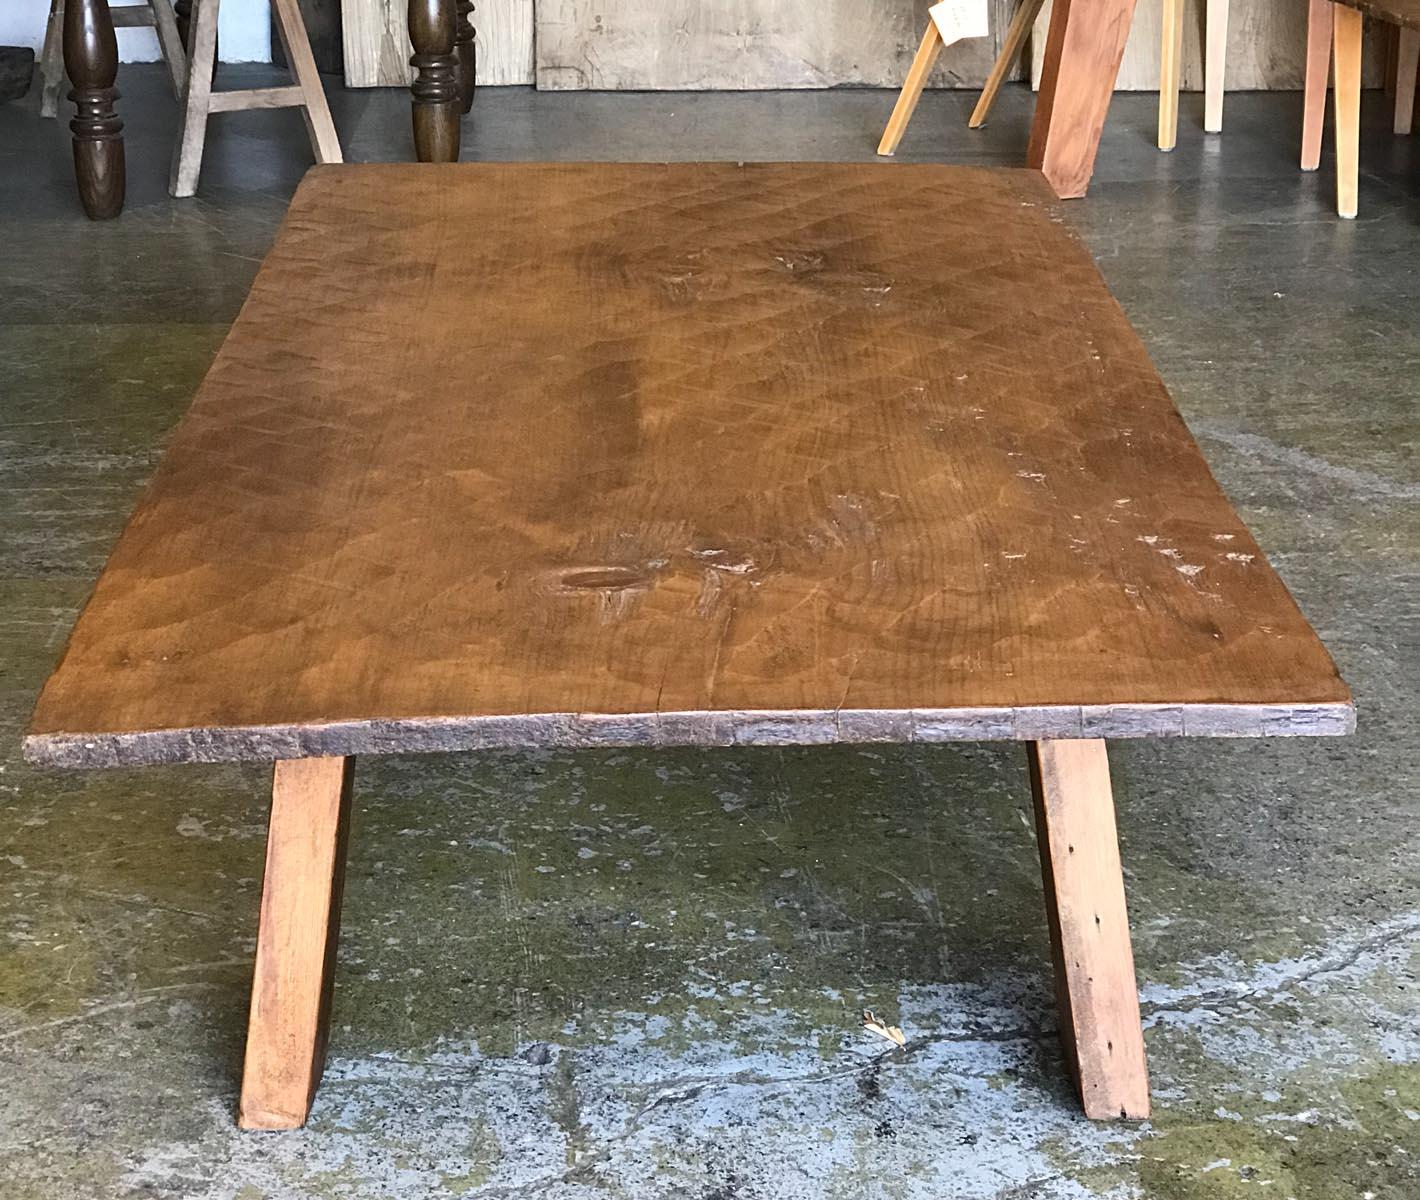 This coffee table is made with a 19th century, one wide board top and reclaimed wood legs. The top  was hand hewn and shows the workmanship of the machete. Beautiful patina. Wax finish. Great rustic, sturdy piece.